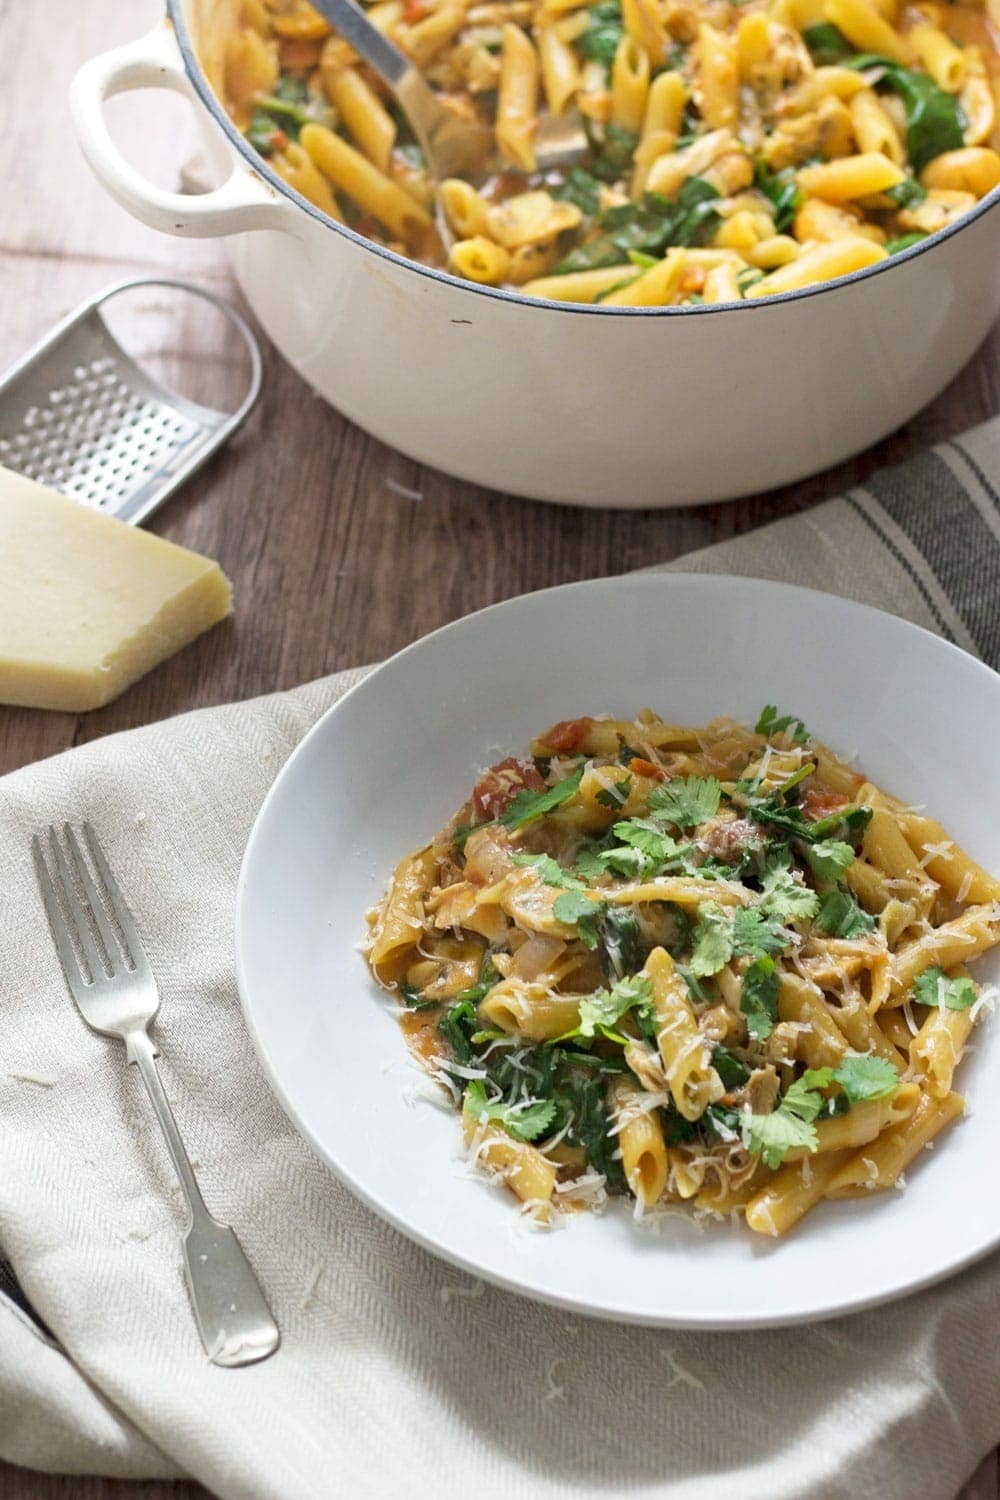 This one pot pasta recipe is ready in 30 minutes and makes a perfect weeknight meal. Add whatever veg you like to make this even healthier!